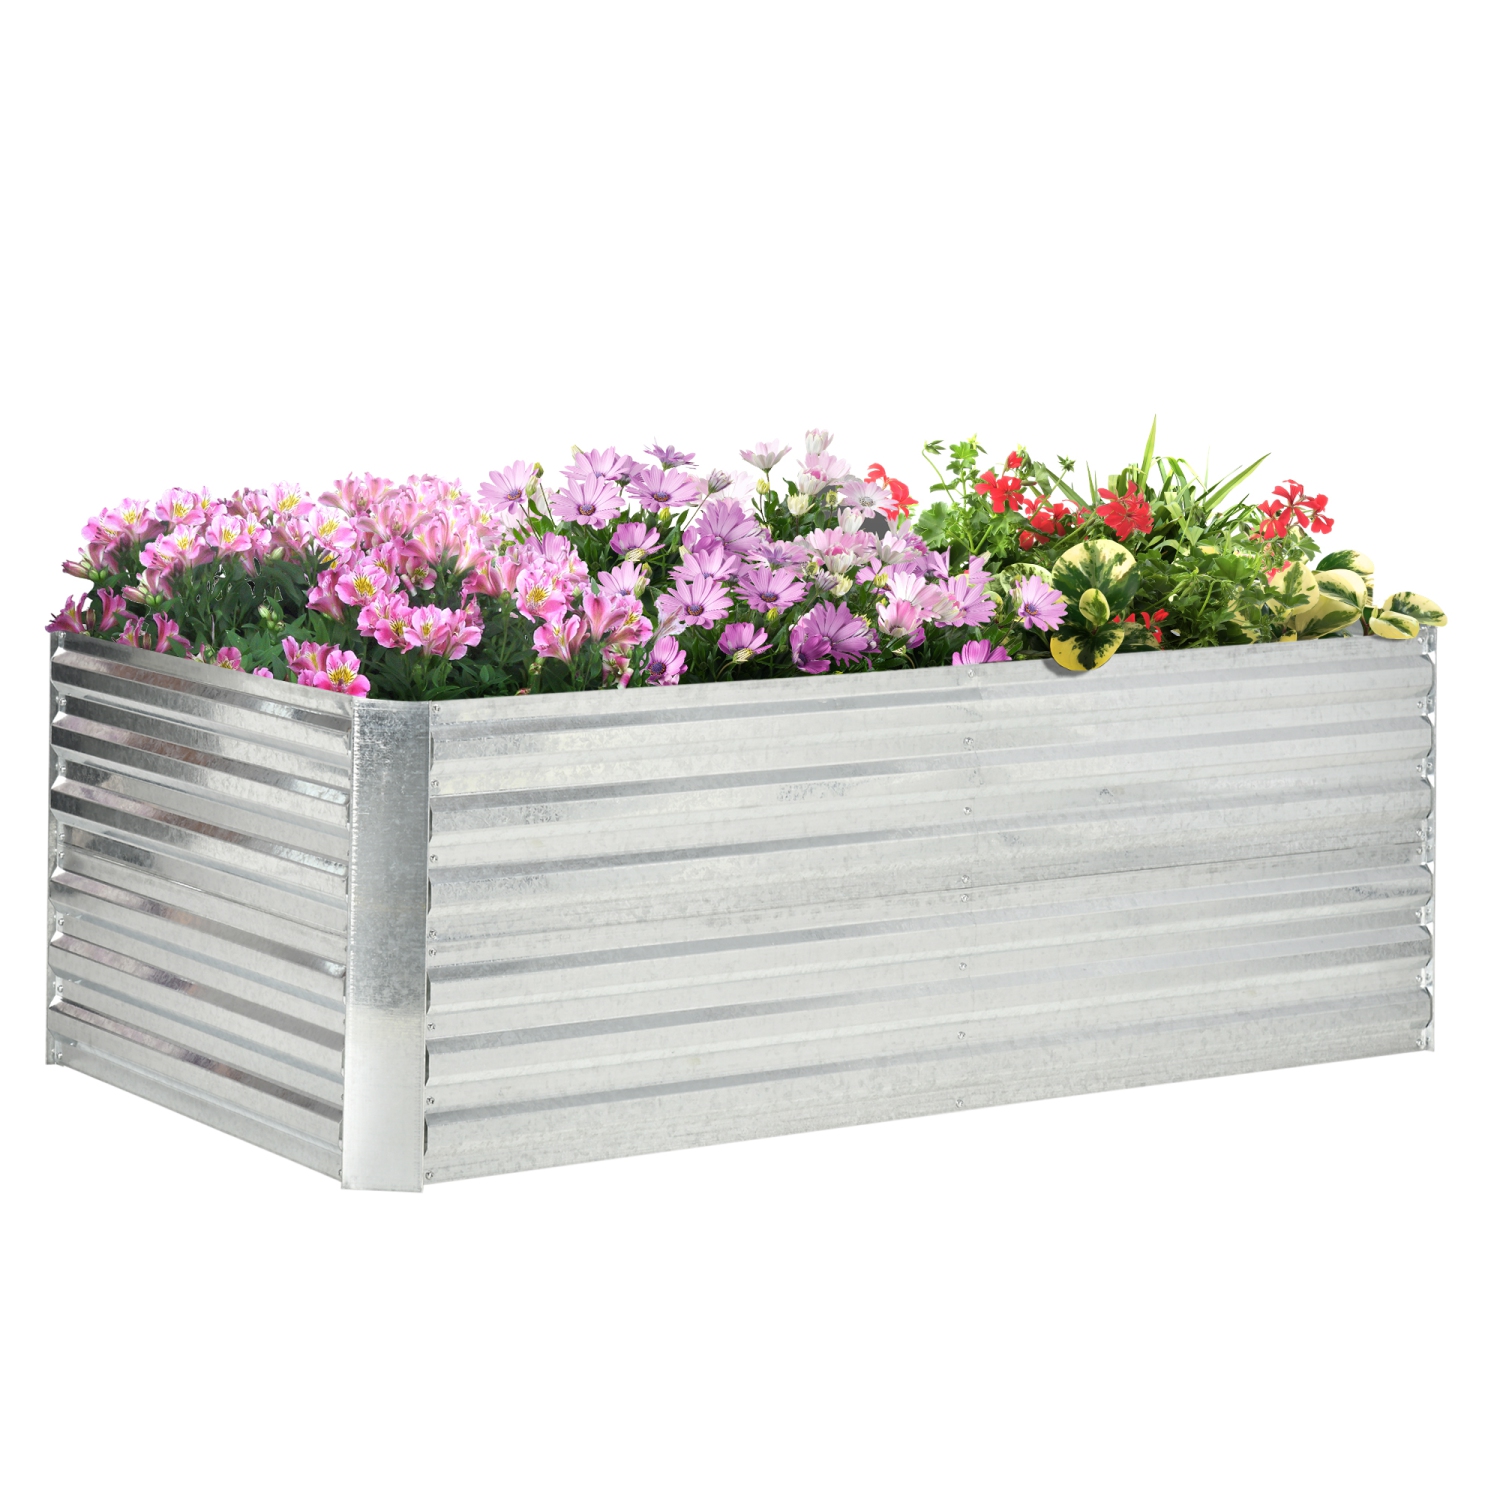 Outsunny Raised Garden Bed, 71'' x 35'' x 23'' Galvanized Steel Planters for Outdoor Plants with Multi-reinforced Rods for Vegetables, Flowers and Herbs, Silver